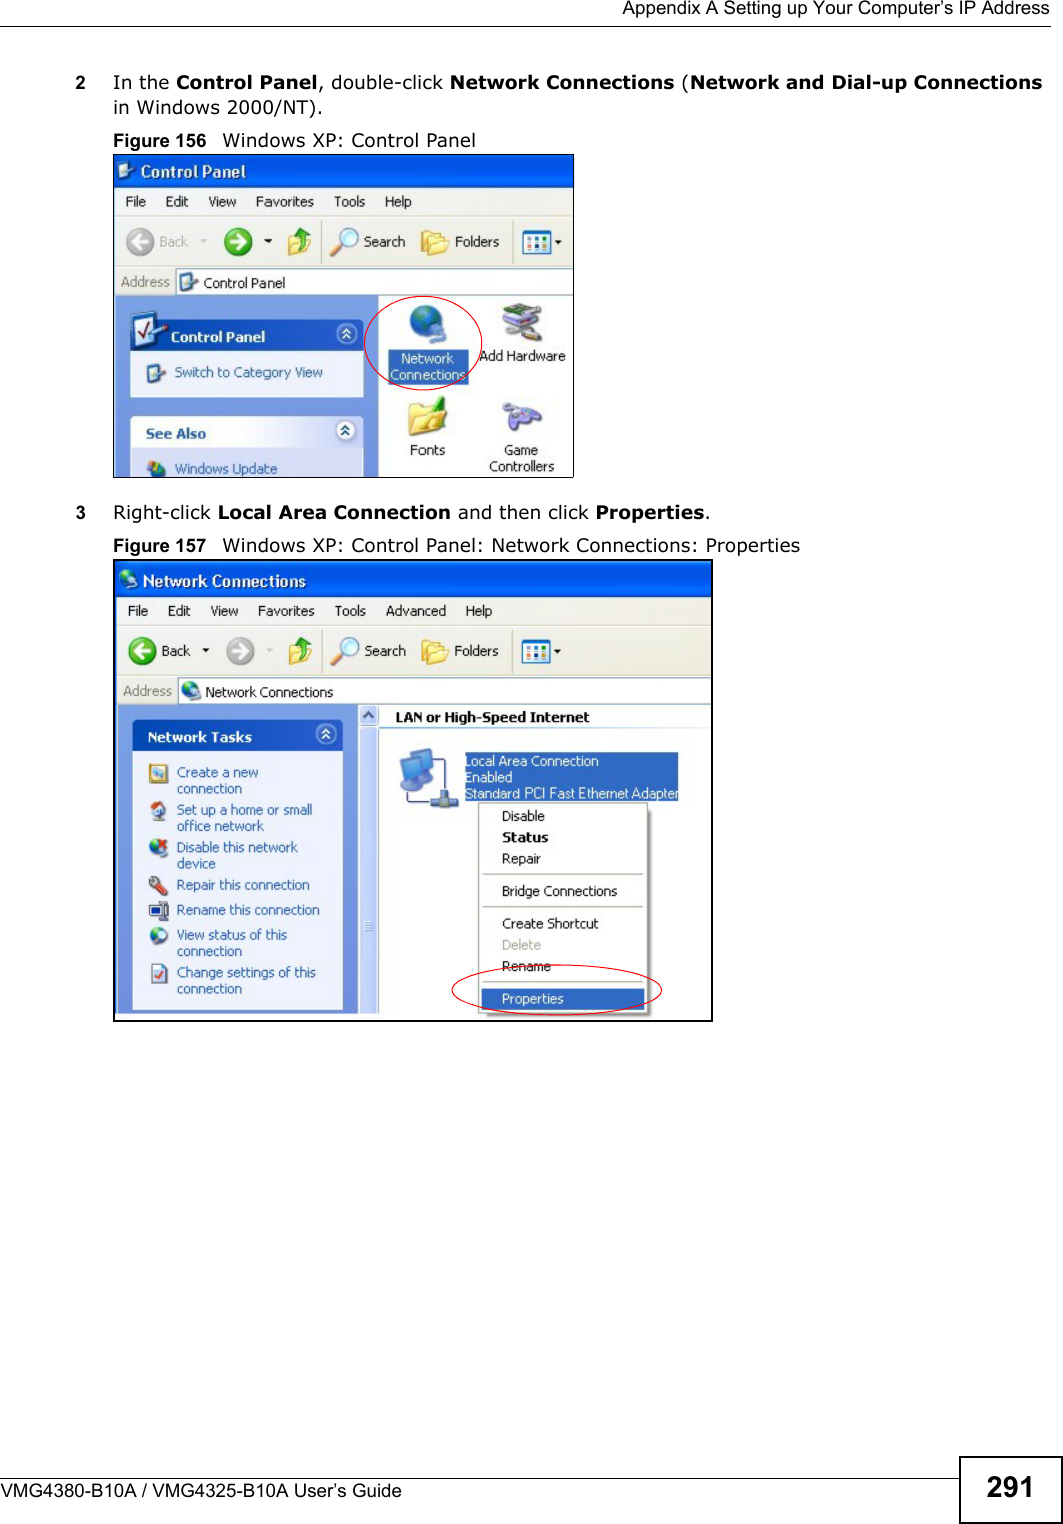  Appendix A Setting up Your Computer’s IP AddressVMG4380-B10A / VMG4325-B10A User’s Guide 2912In the Control Panel, double-click Network Connections (Network and Dial-up Connectionsin Windows 2000/NT).Figure 156   Windows XP: Control Panel3Right-click Local Area Connection and then click Properties.Figure 157   Windows XP: Control Panel: Network Connections: Properties